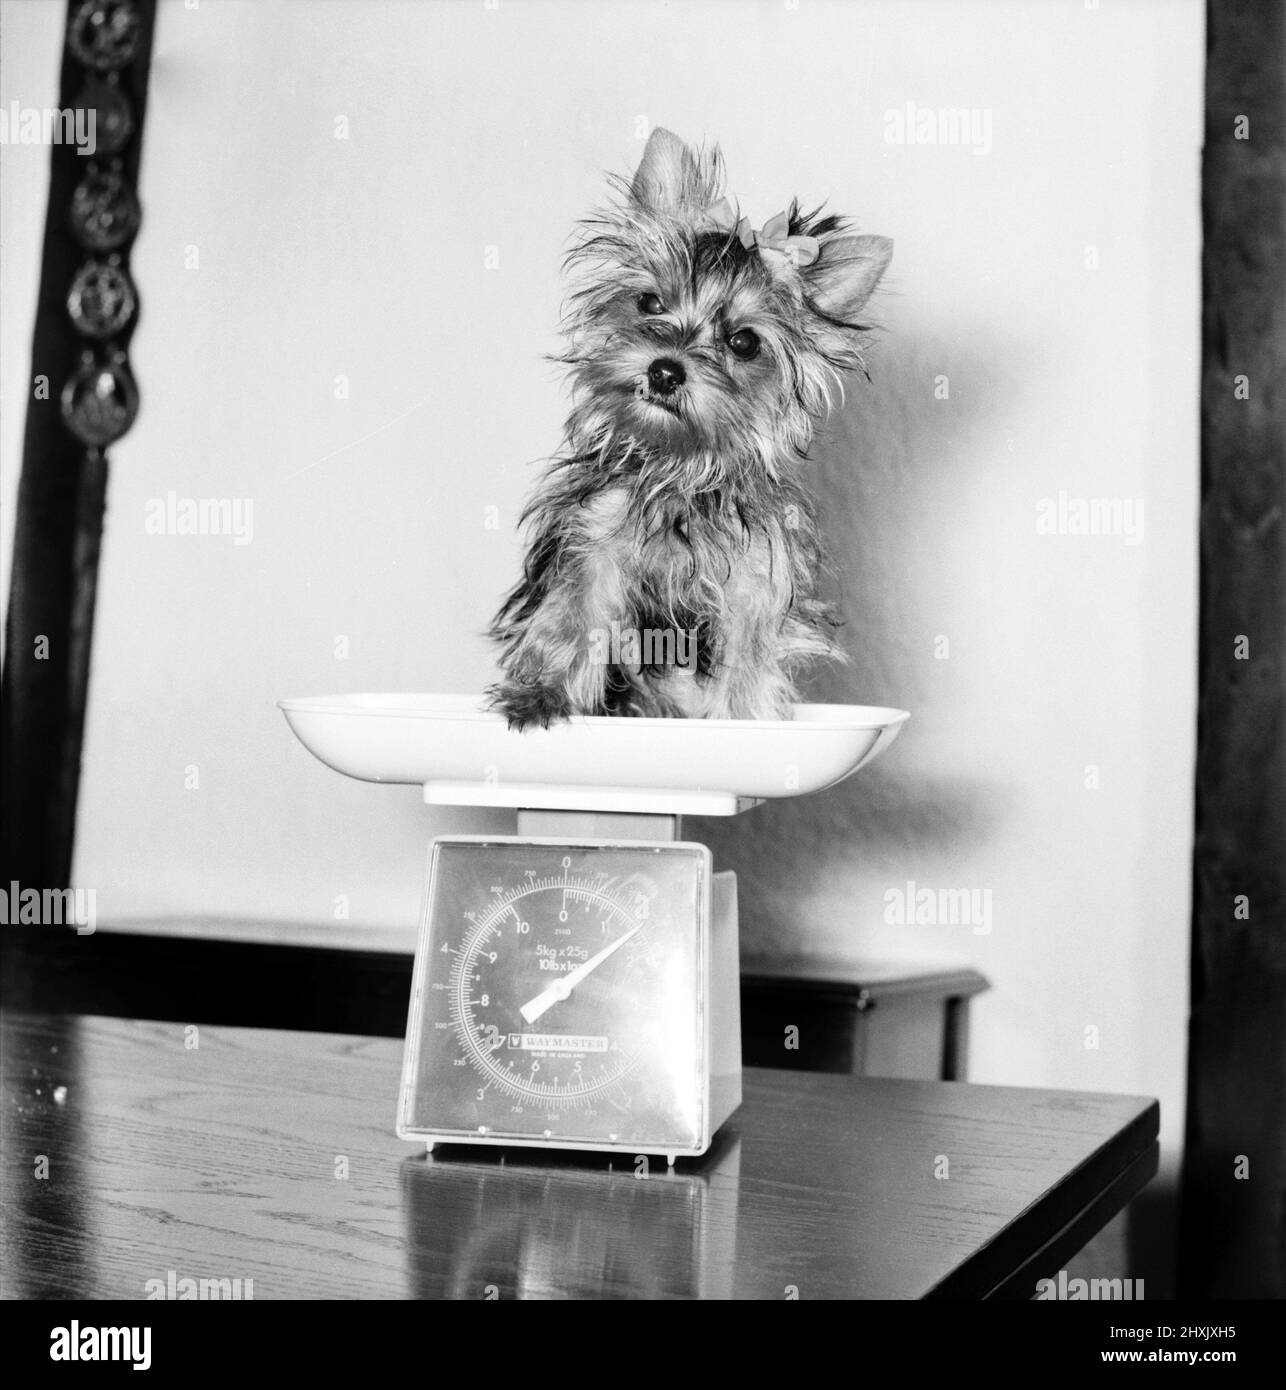 Fifi here is smaller than the average Yorkshire Terrier. Seen here sitting on a set of kitchen scales and weighing in at only 24 oz. April 1977 77-02090-002 Stock Photo